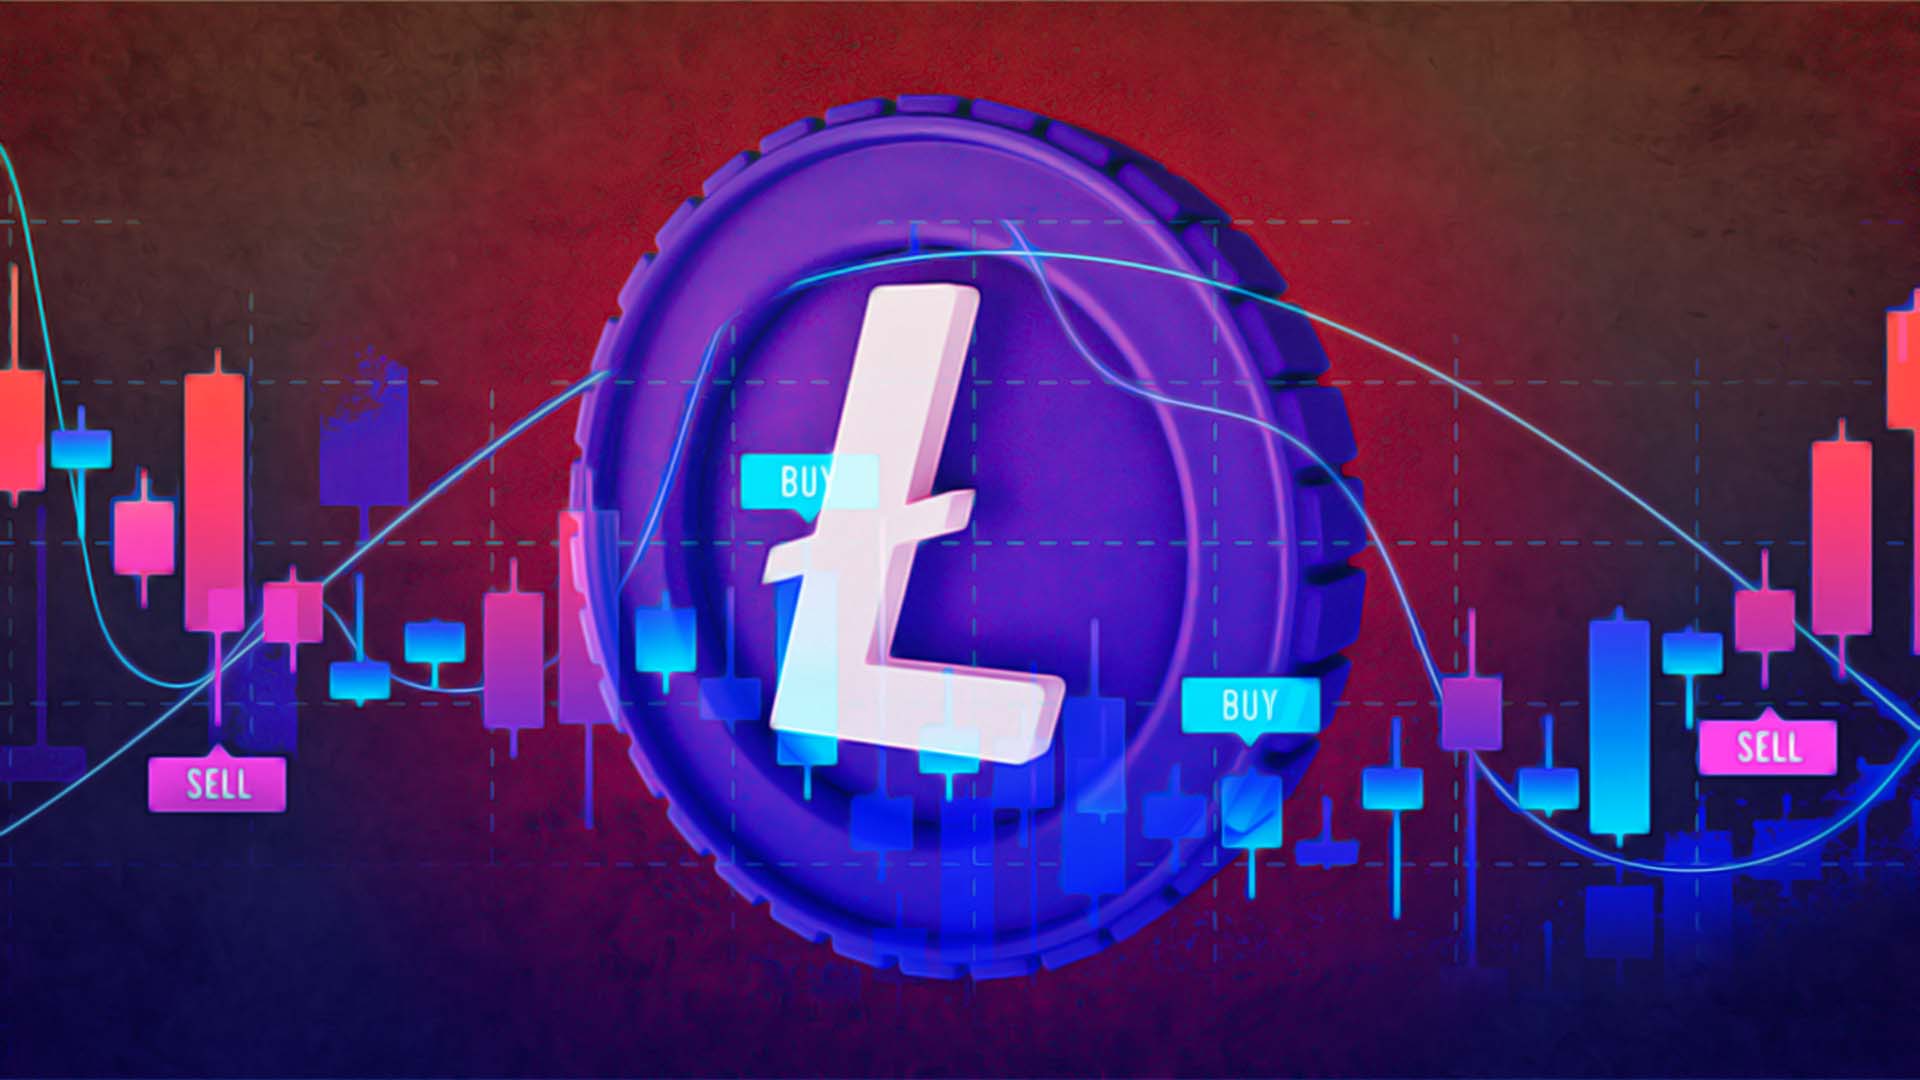 Litecoin Price Prediction 2023: LTC Crypto to Rally in 2023 – Analysts